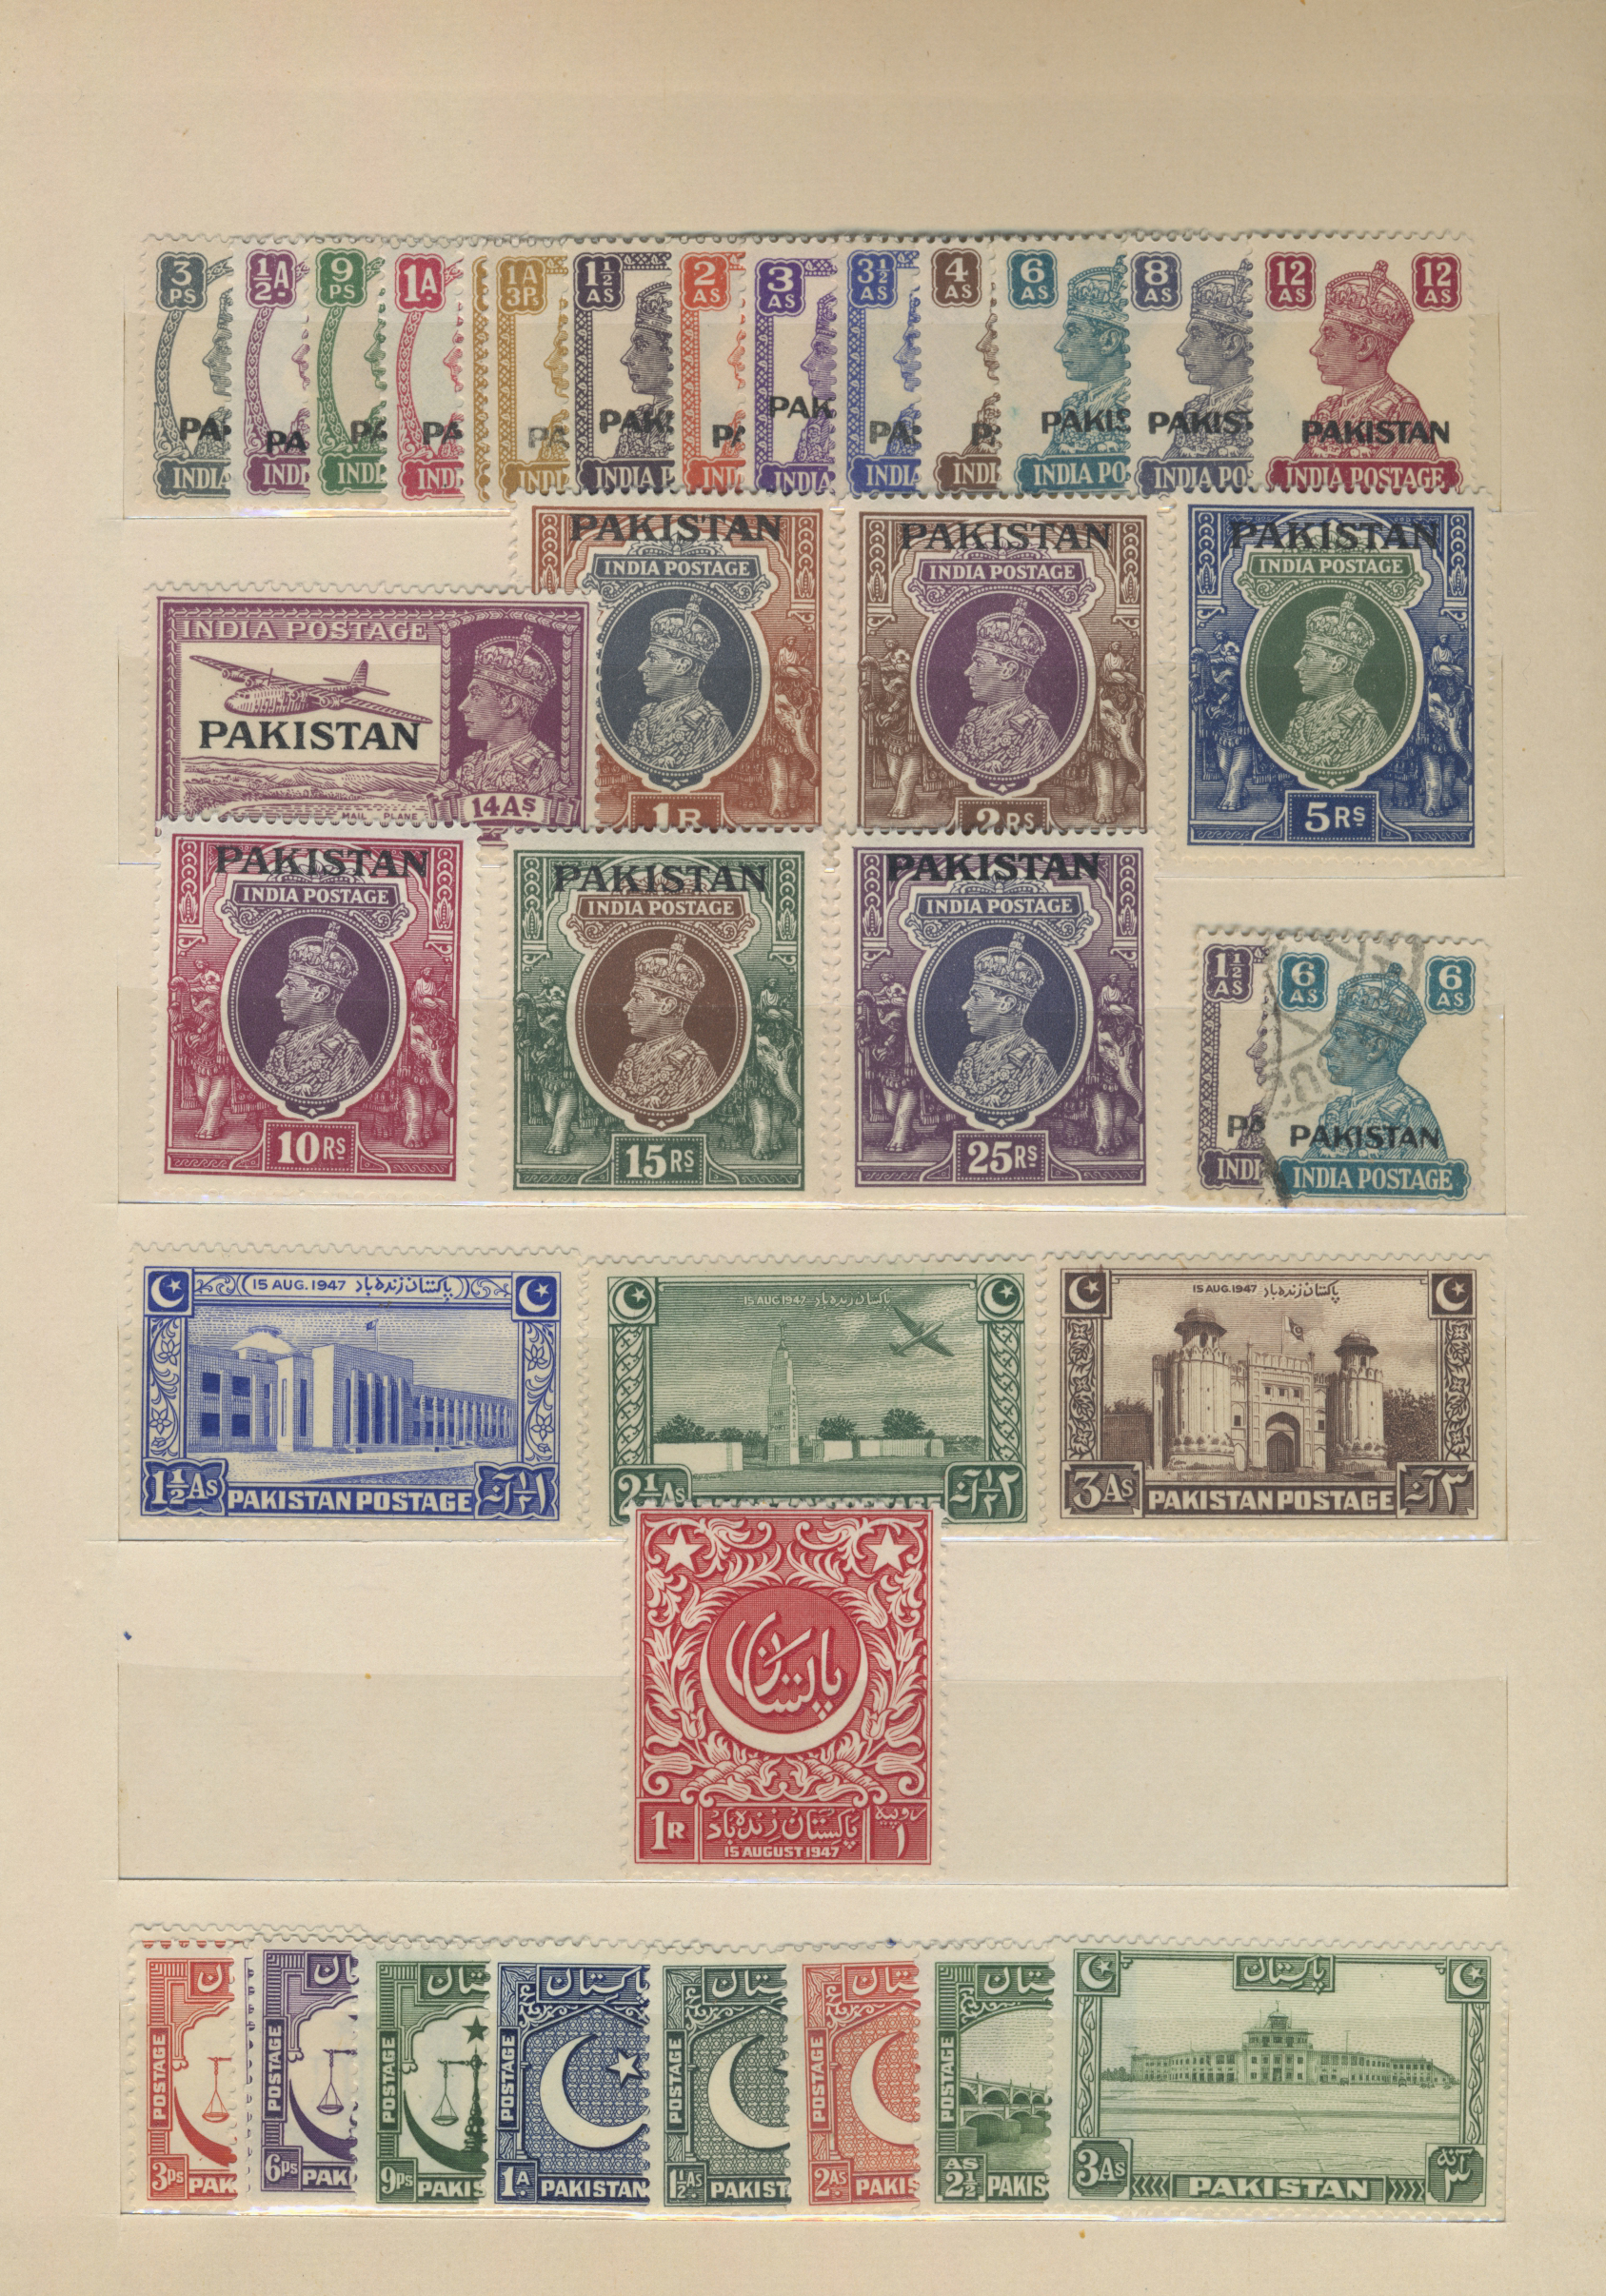 Lot 07738 - pakistan  -  Auktionshaus Christoph Gärtner GmbH & Co. KG 55th AUCTION - Day 4